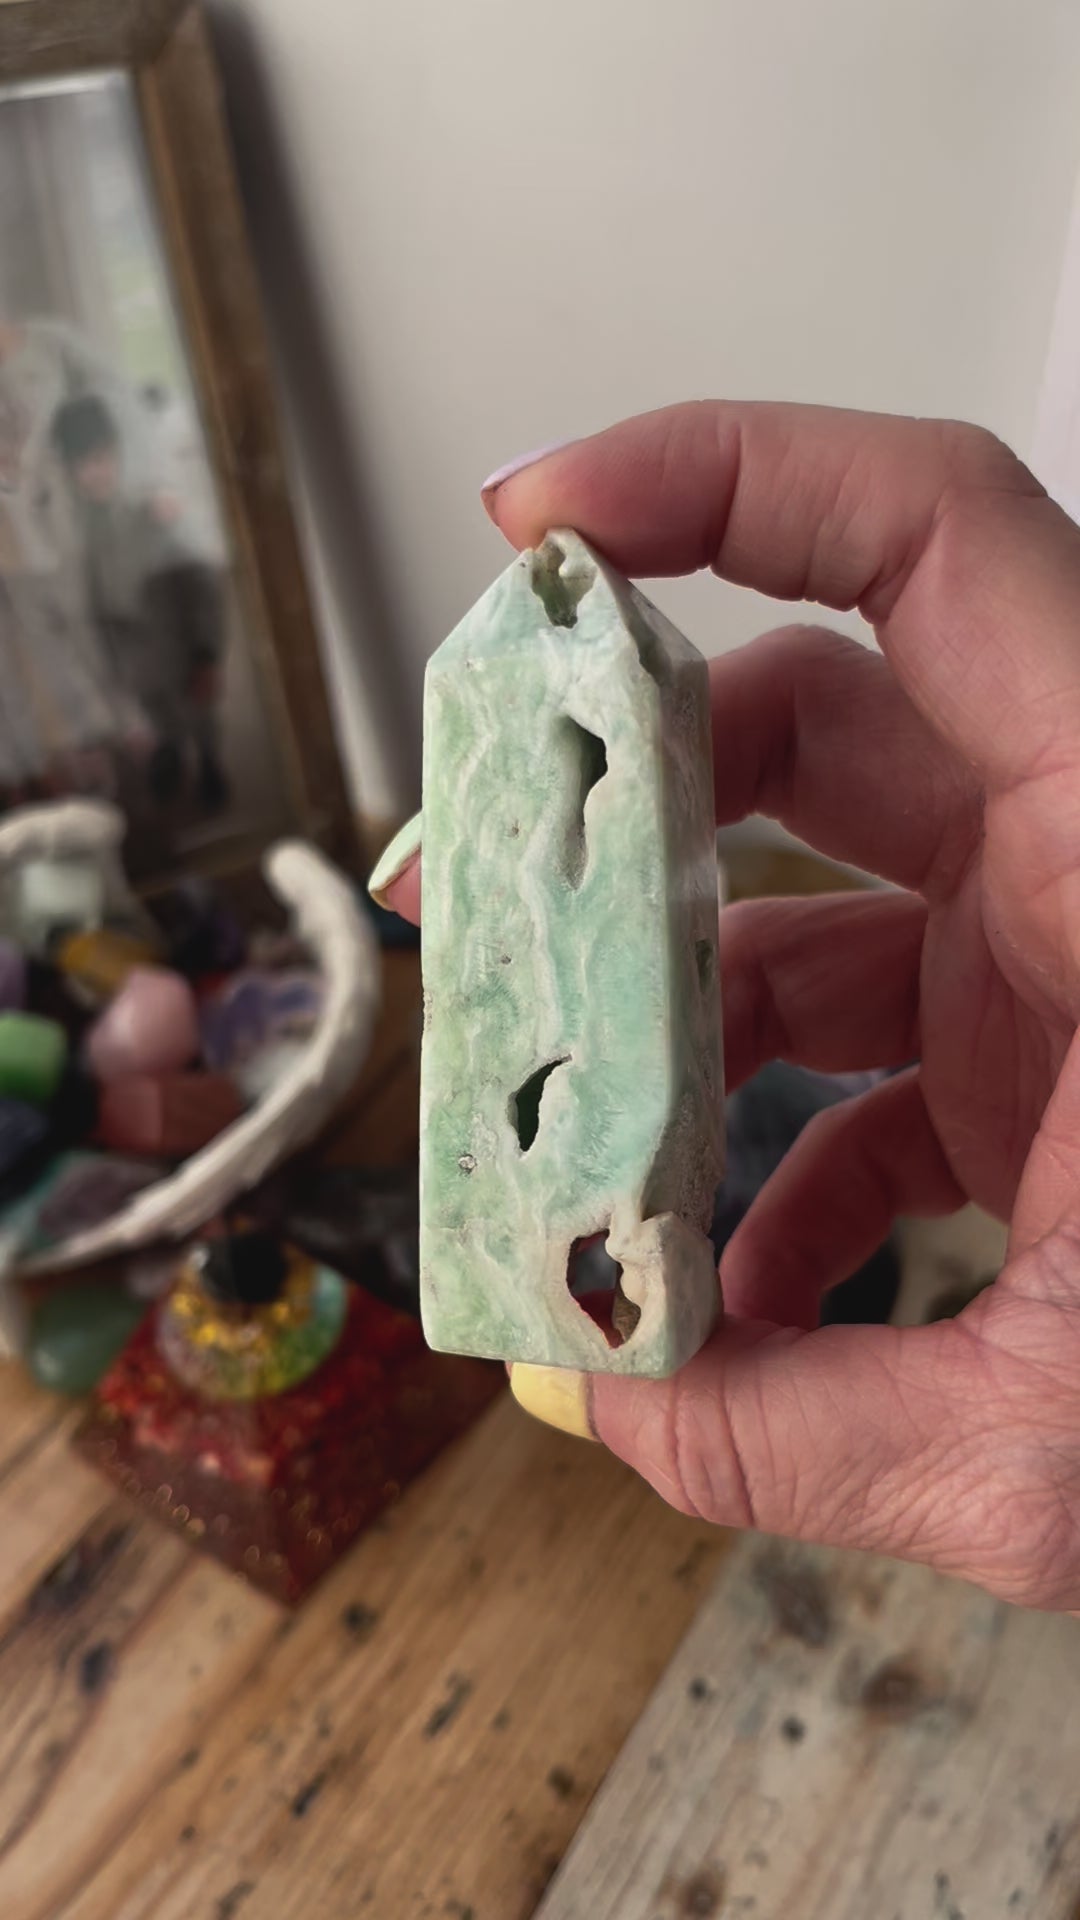 Video showing all angels of Amozanite Crystal Towers, Polished Amazonite